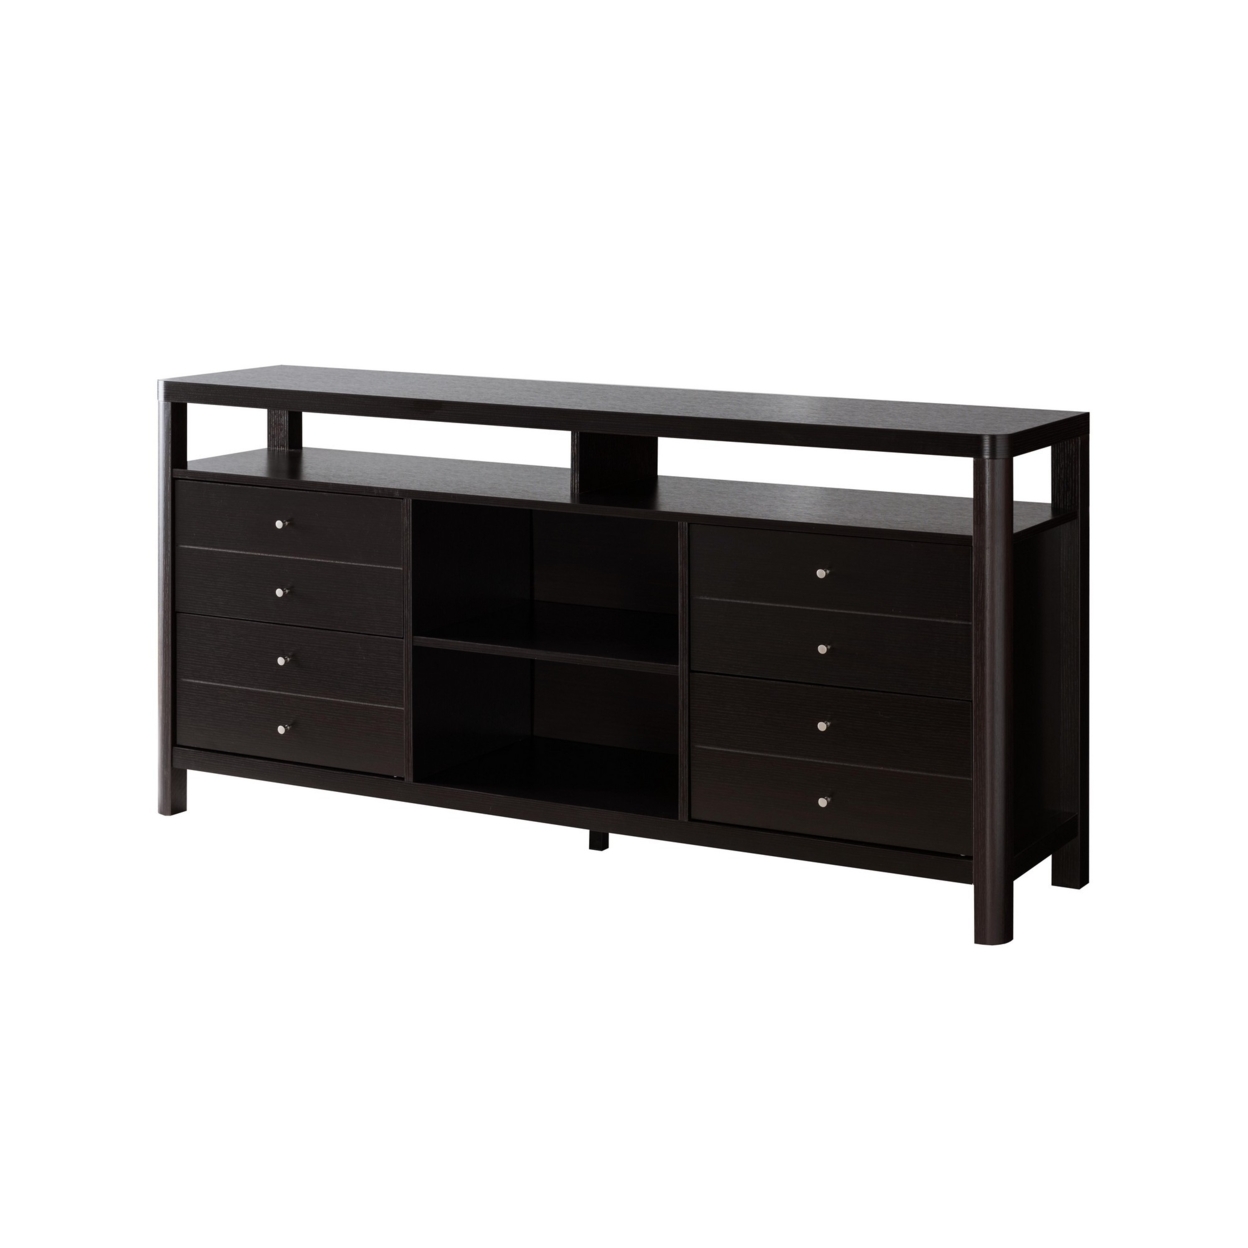 60 Inches 8 Drawer TV Stand With Open Compartments, Brown- Saltoro Sherpi